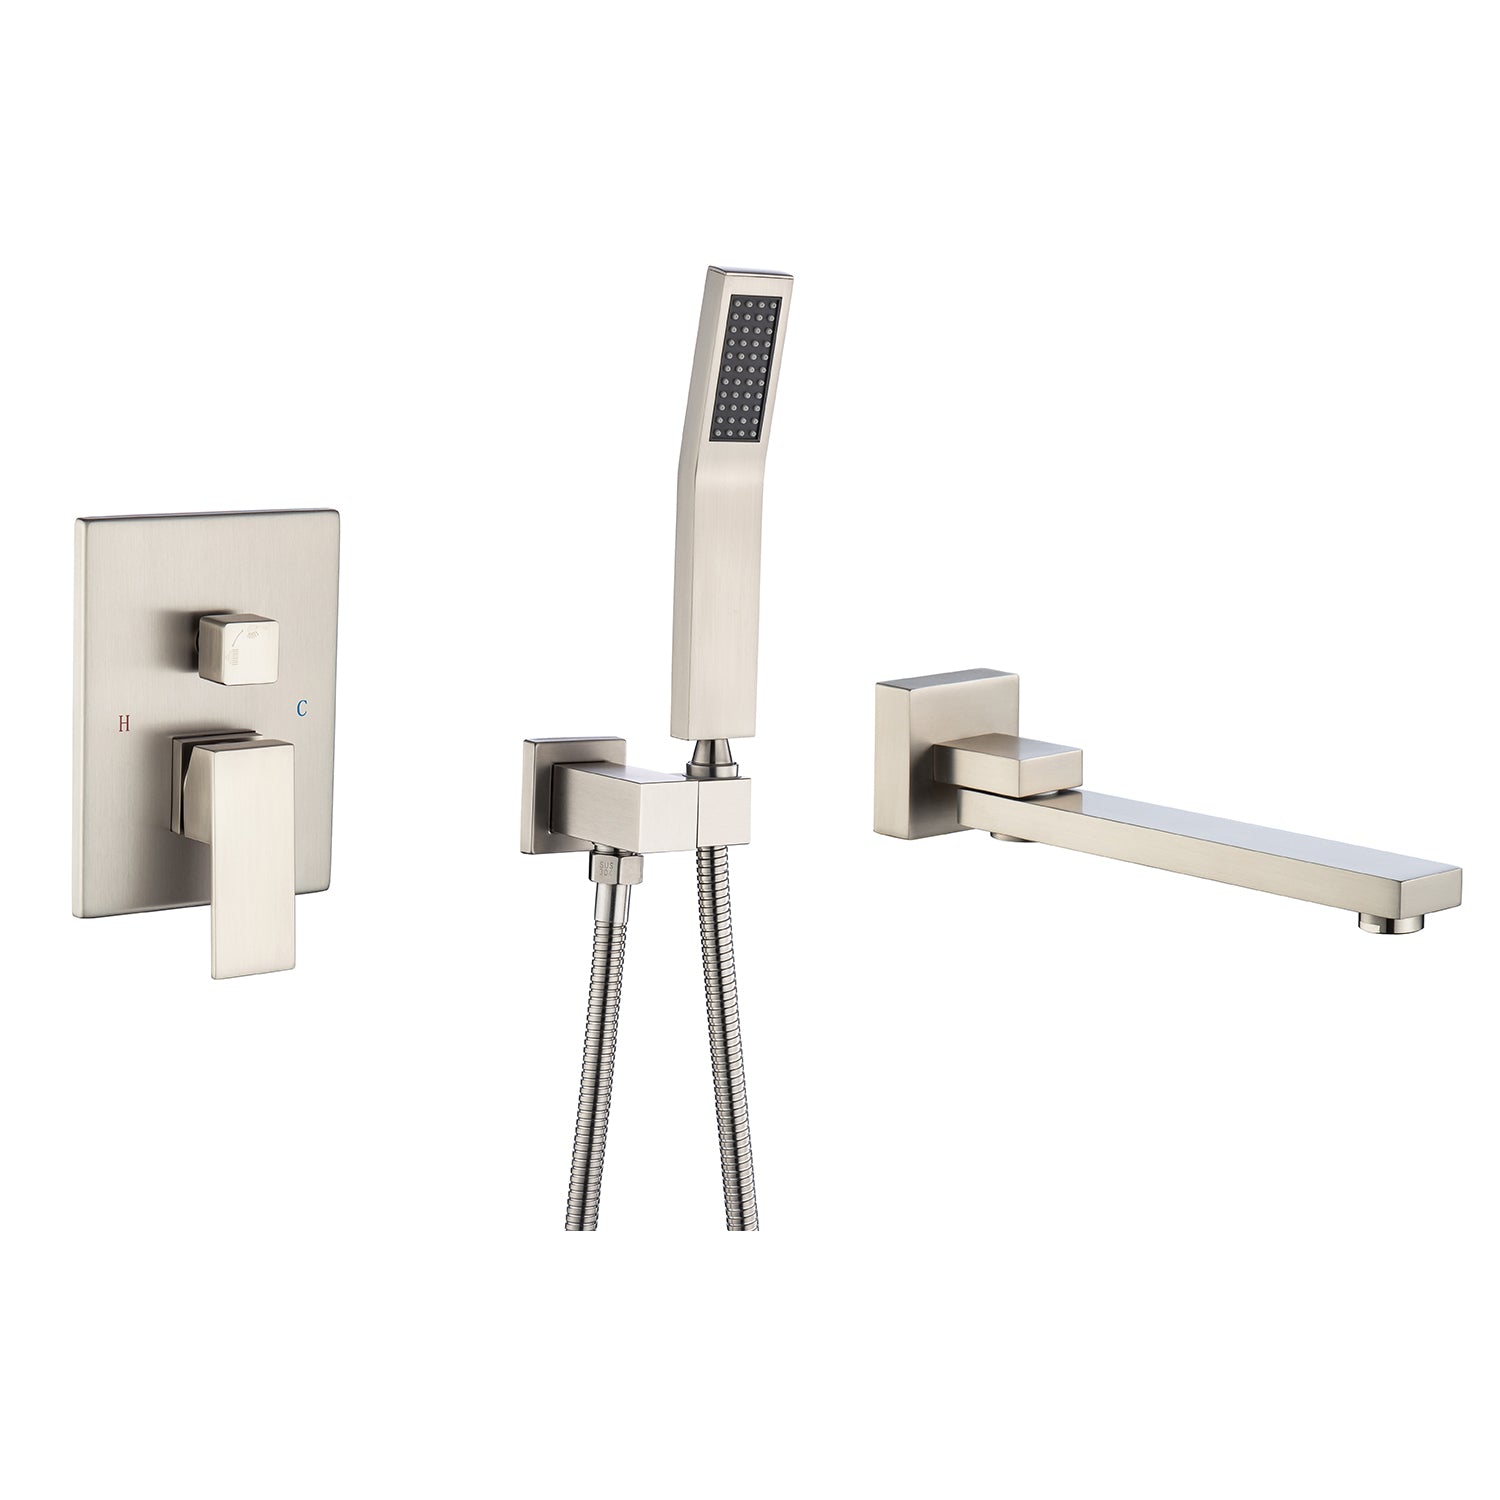 [Rainlex 93107] Tub and Shower Faucet with Rough-in Valve